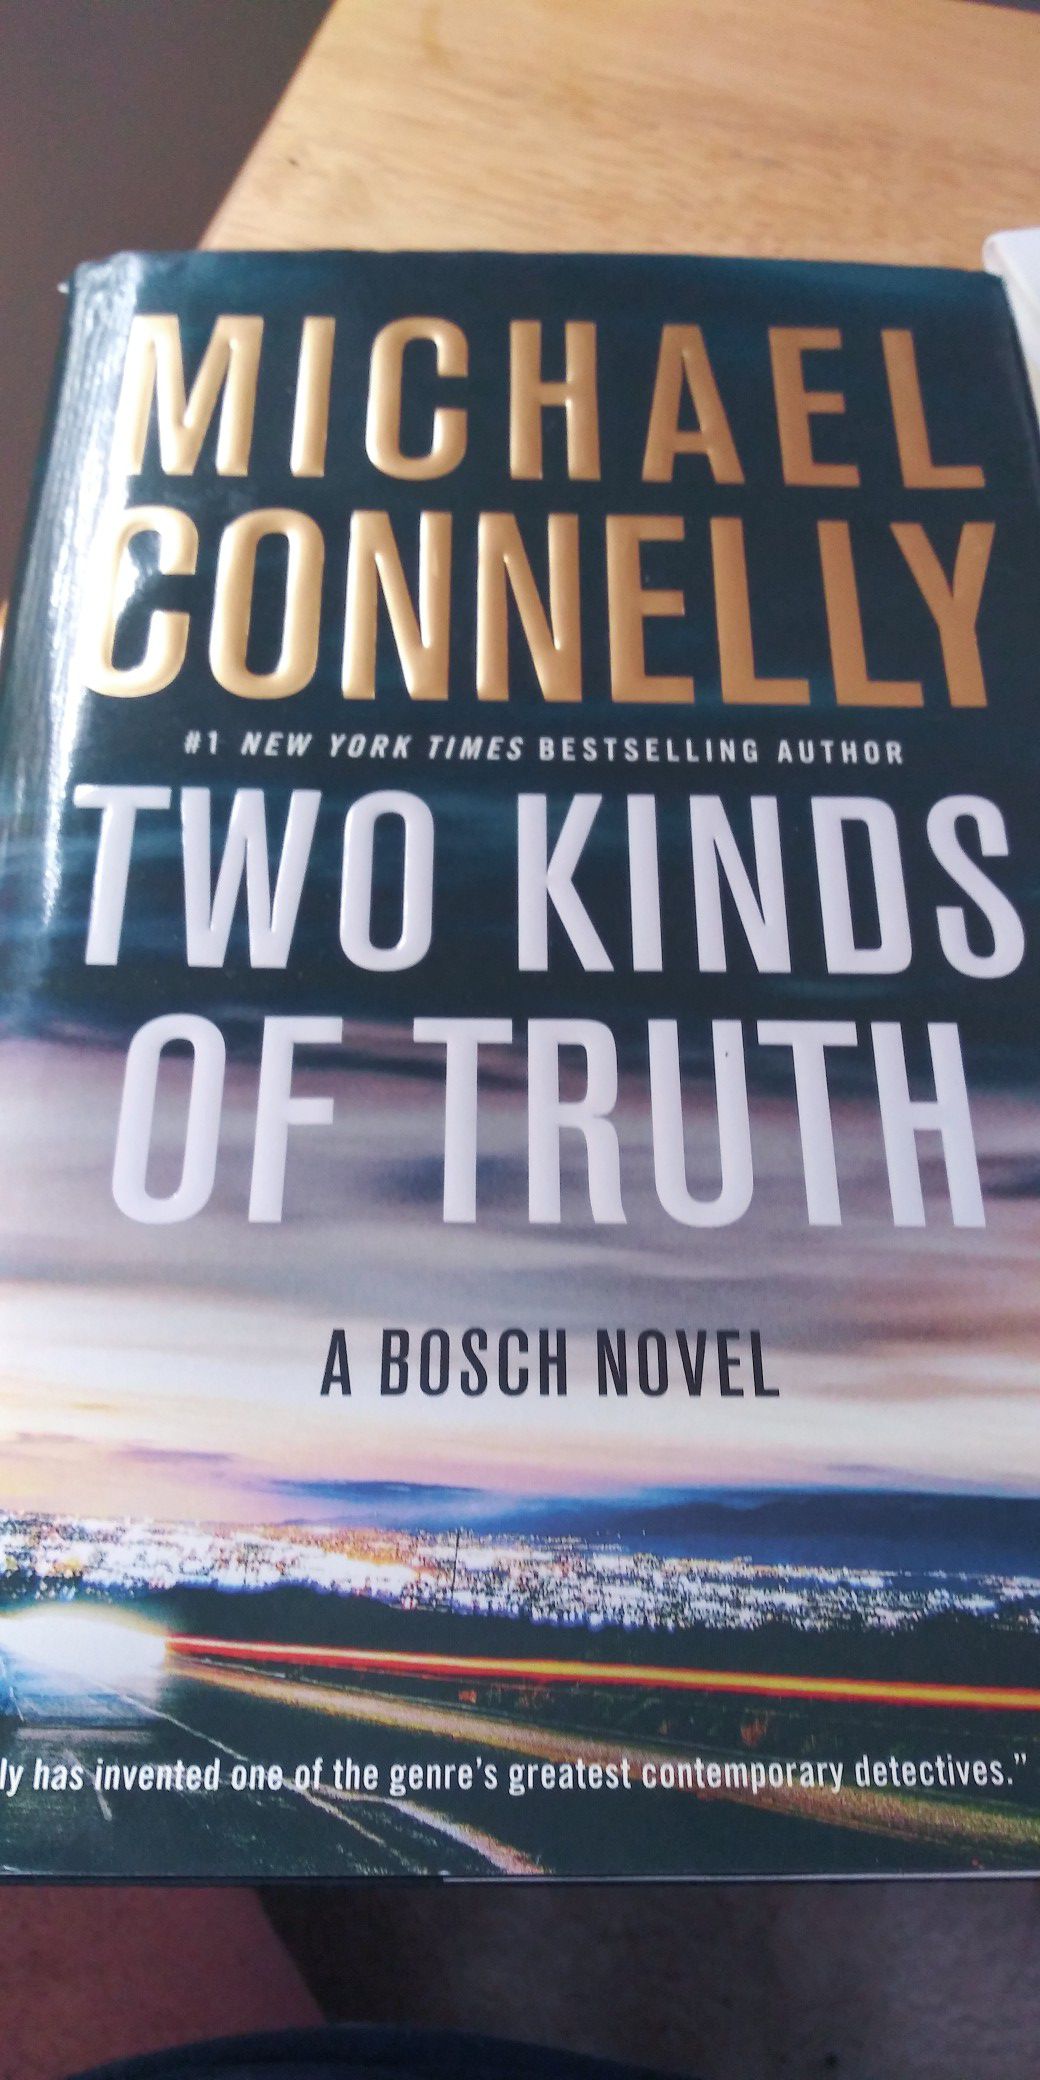 MIICHAEL CONNELLY TWO KINDS OF TRUTH. BOSCH NOVEL.